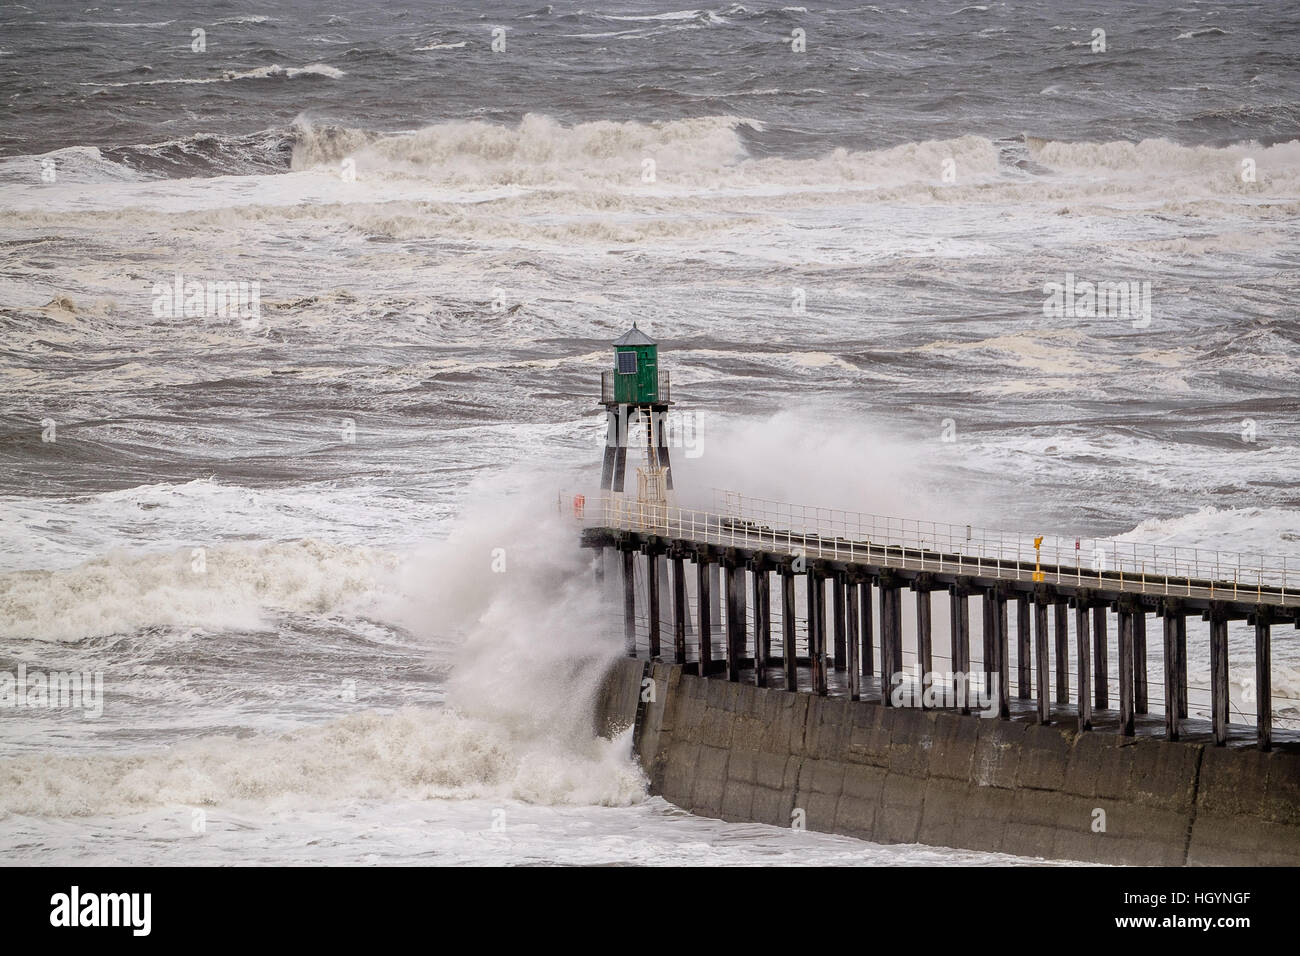 UK Weather. Whitby, North Yorkshire, UK. 13th January 2017. Rough seas breaking over protective piers around Whitby harbour caused by high winds in North-east England. Copyright Ian Wray Stock Photo